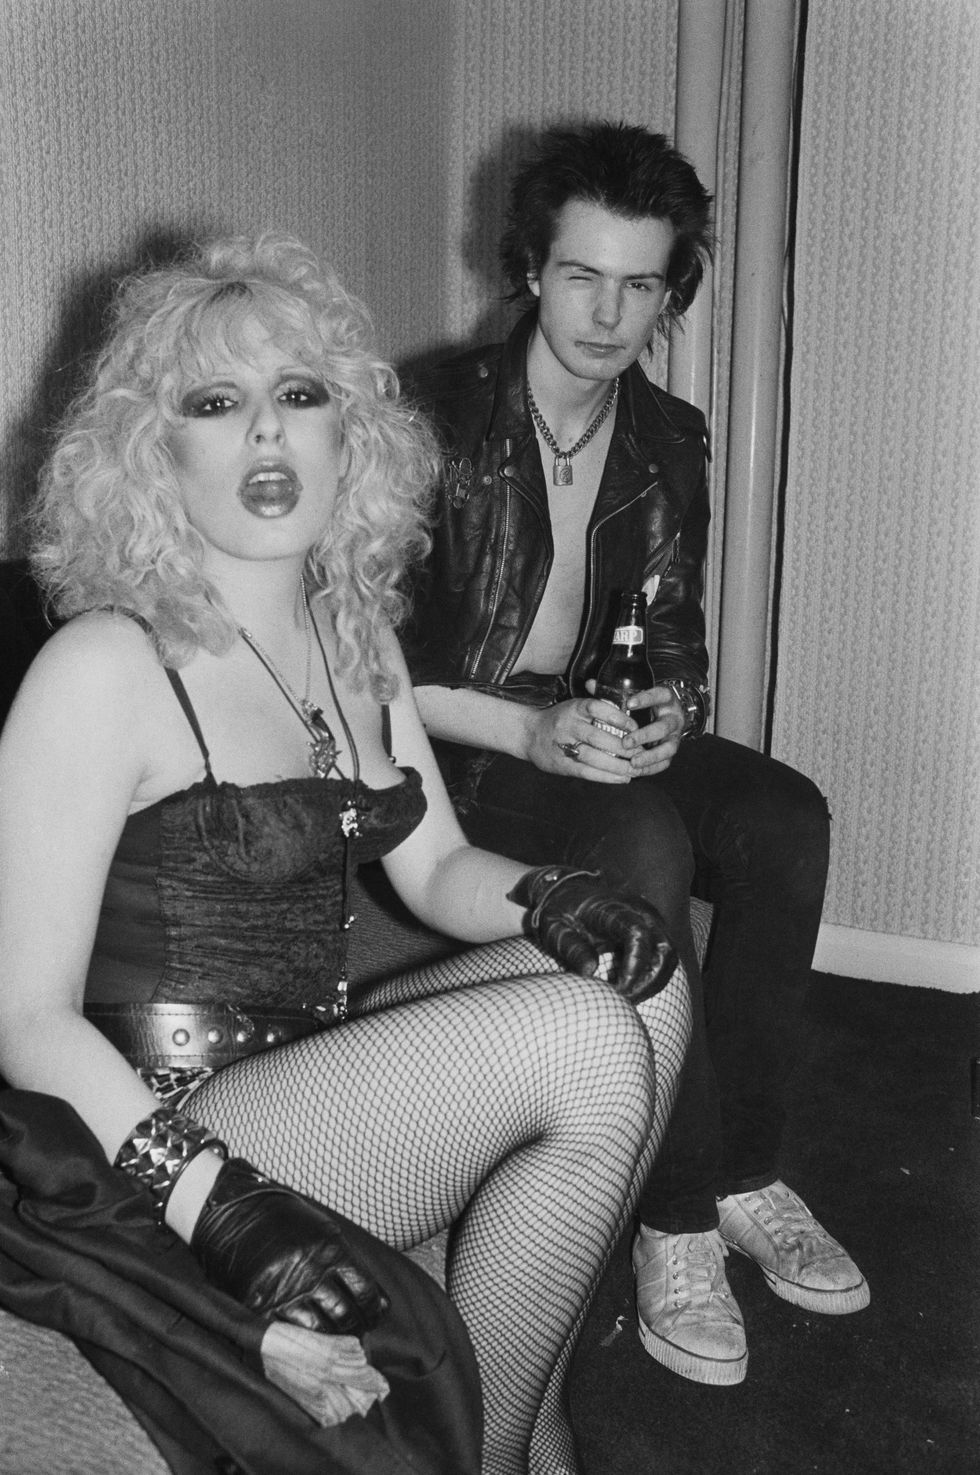 Sid Vicious and Nancy Spungen backstage at the Electric Ballroom in London on August 15, 1978